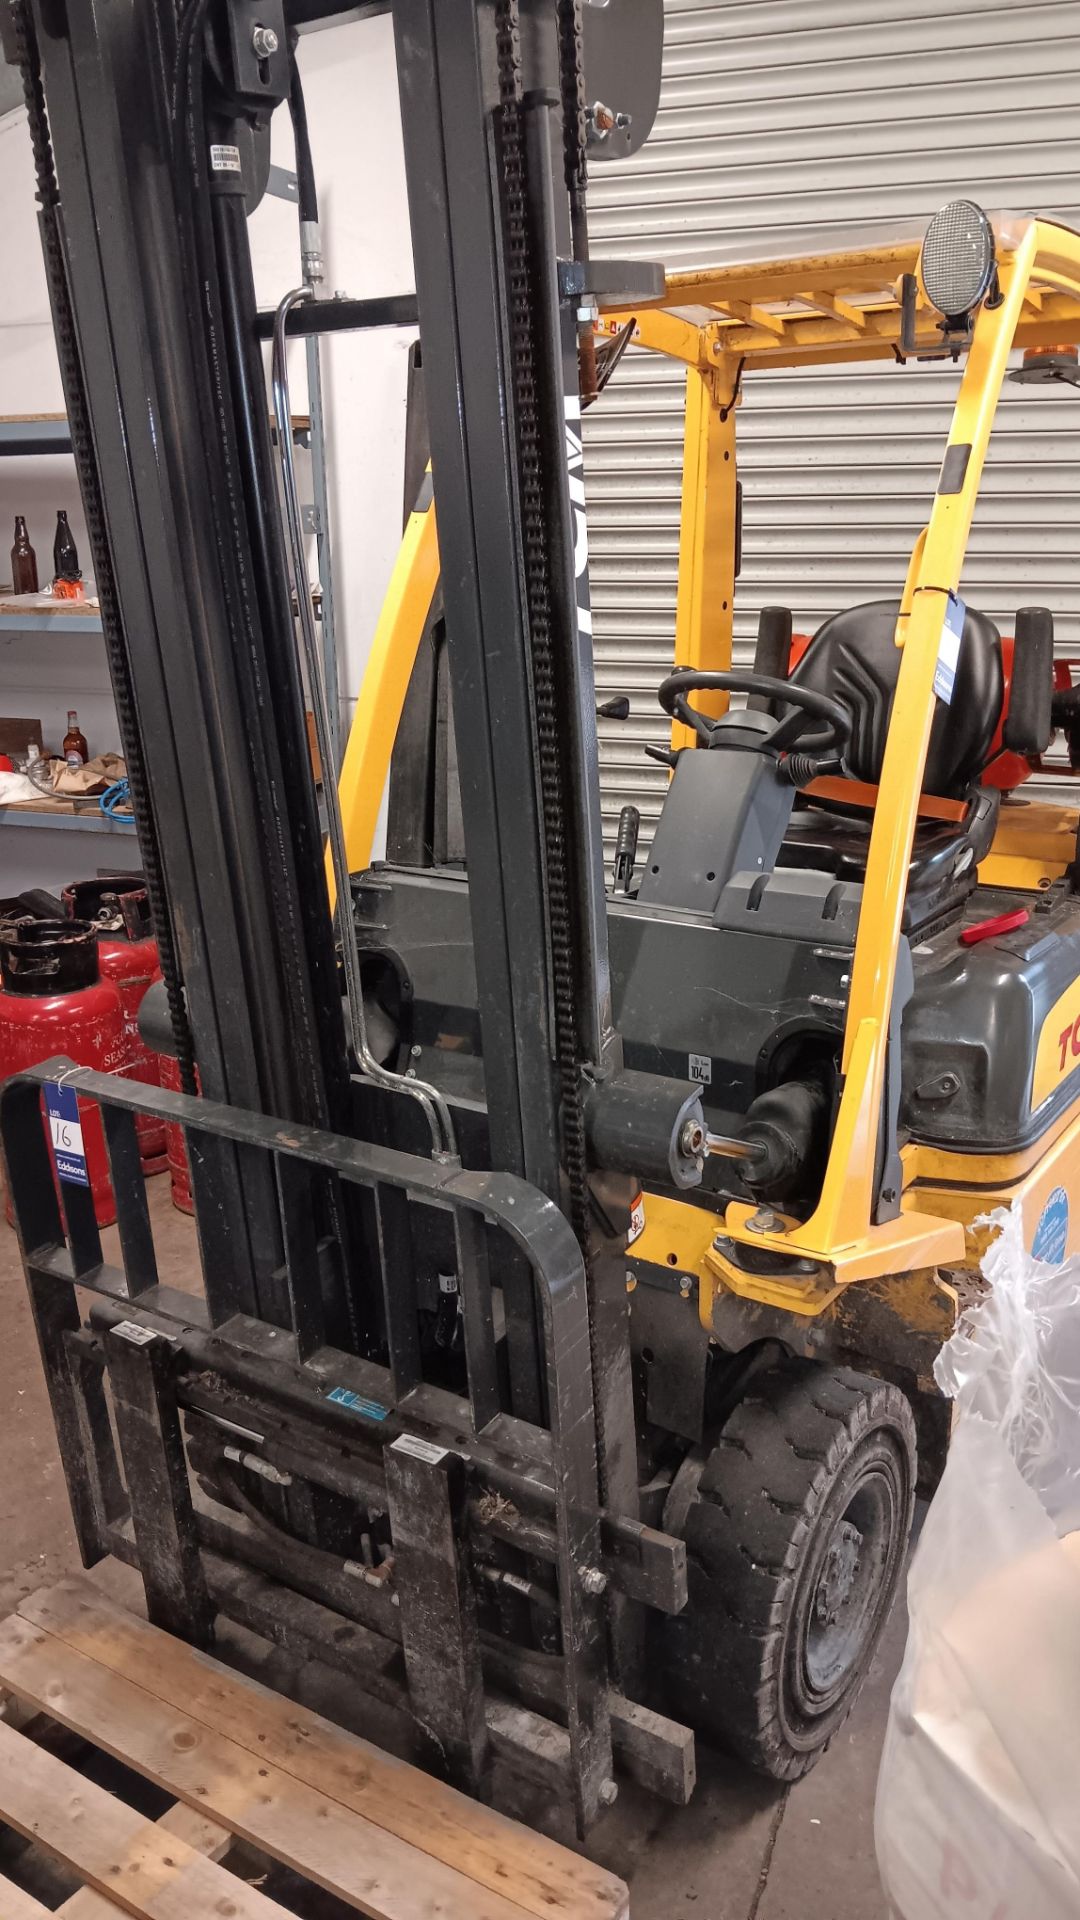 TCM 15 PID1A15LK 1.5ton SWL LPG forklift, serial number P1D1E704039 (2018) fitted side shift, 819 - Image 2 of 10